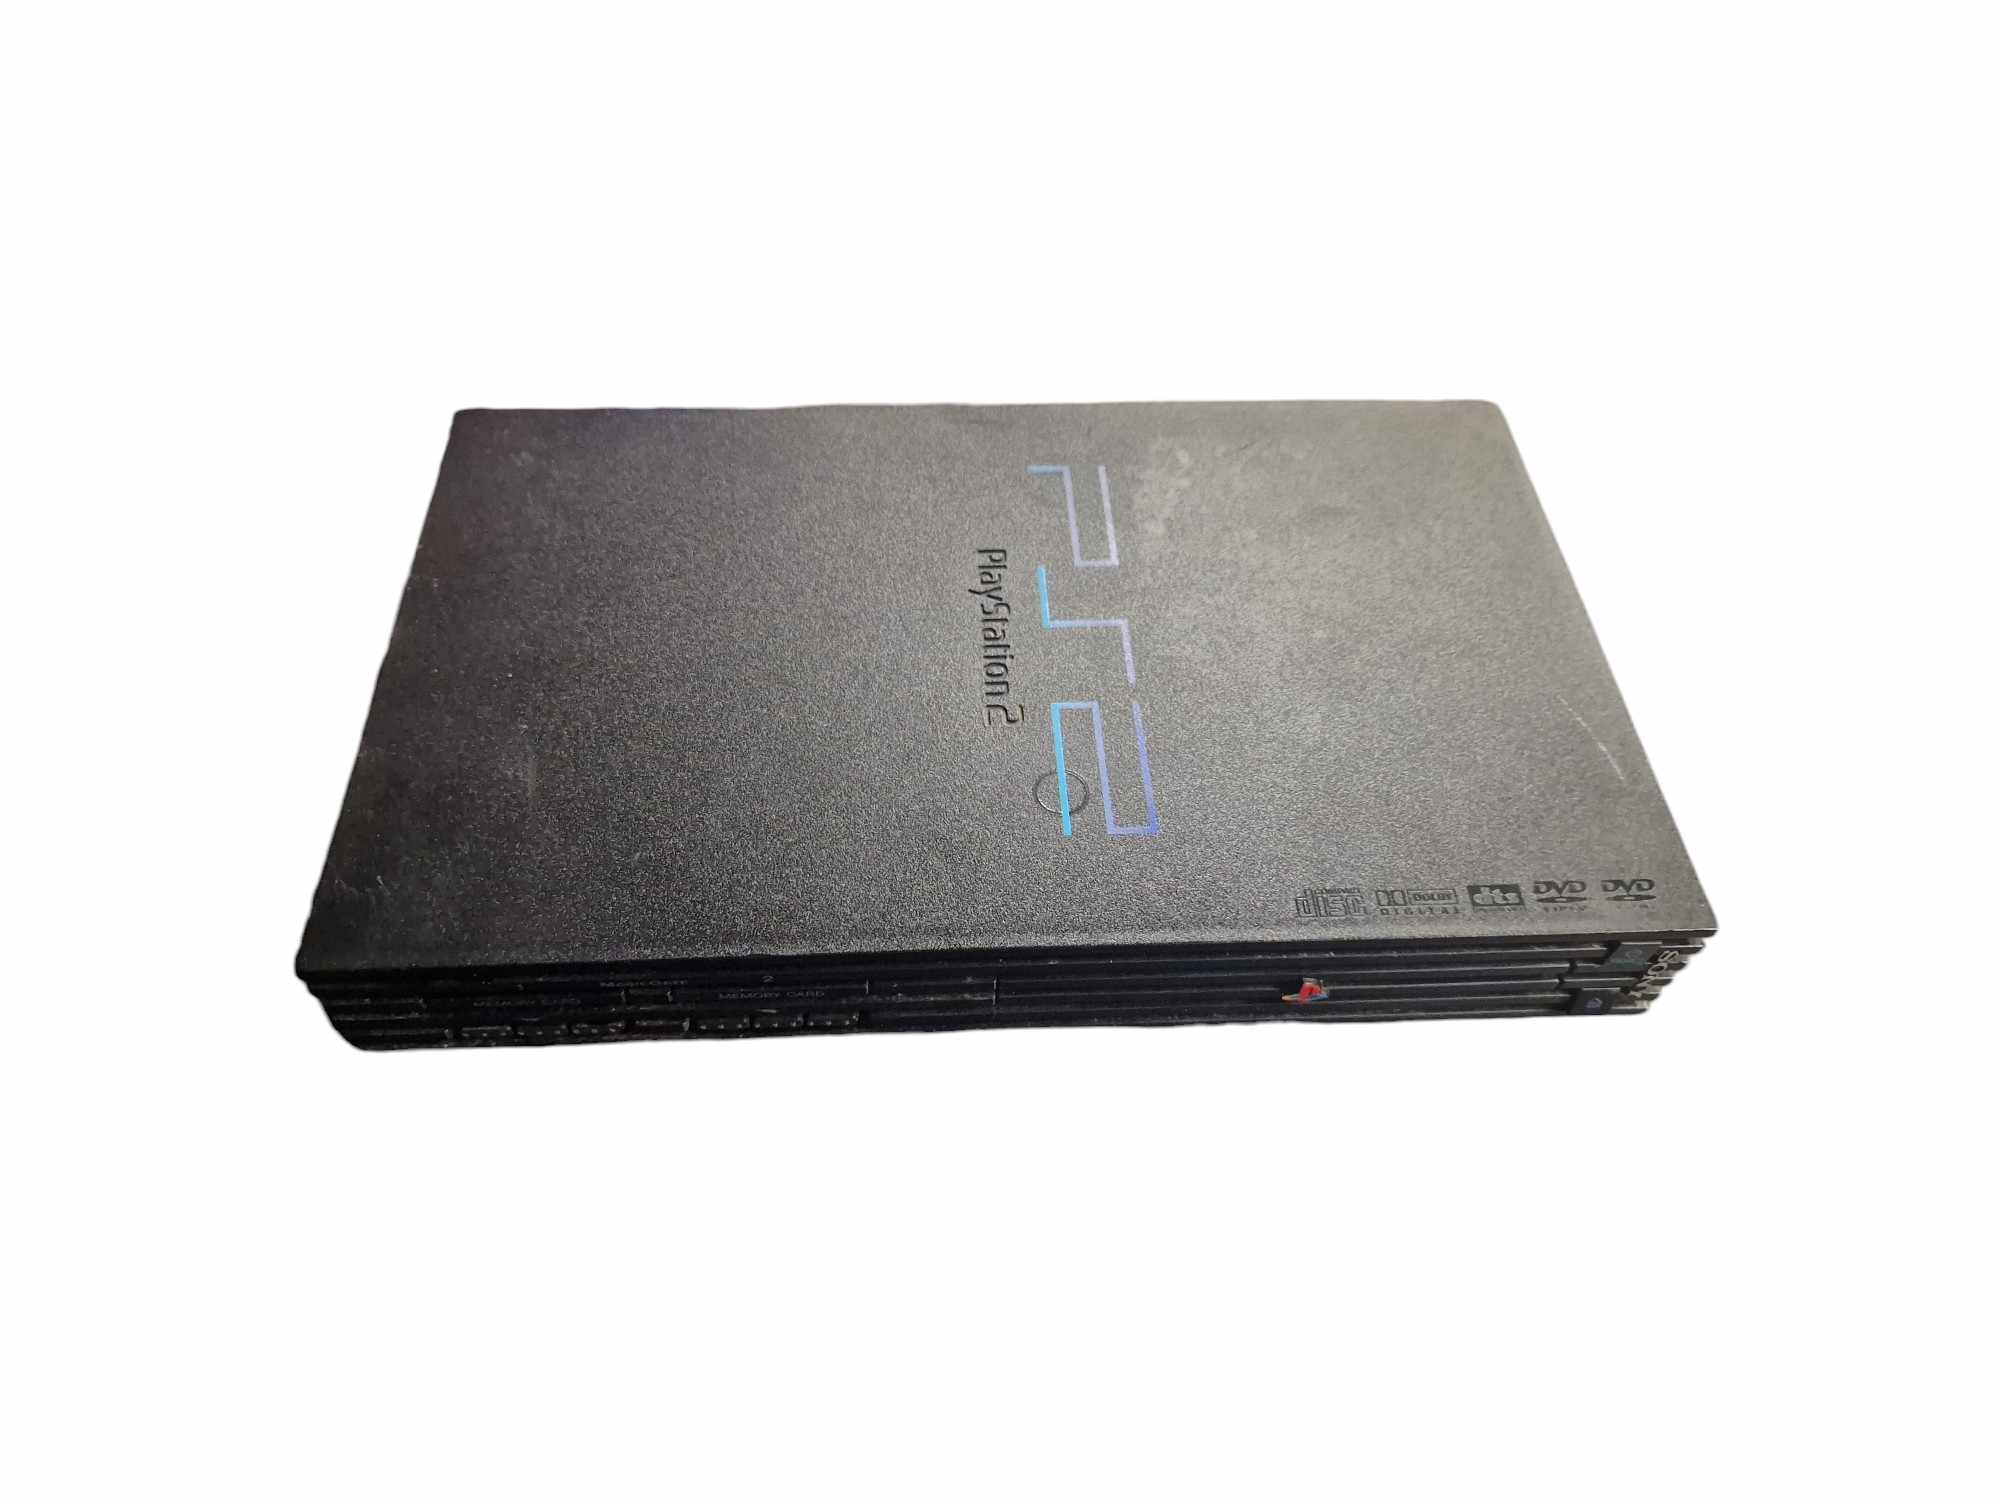 Playstation 2 Original Black Console Unboxed - Includes Power Lead AV Cable 3rd Party Controller 